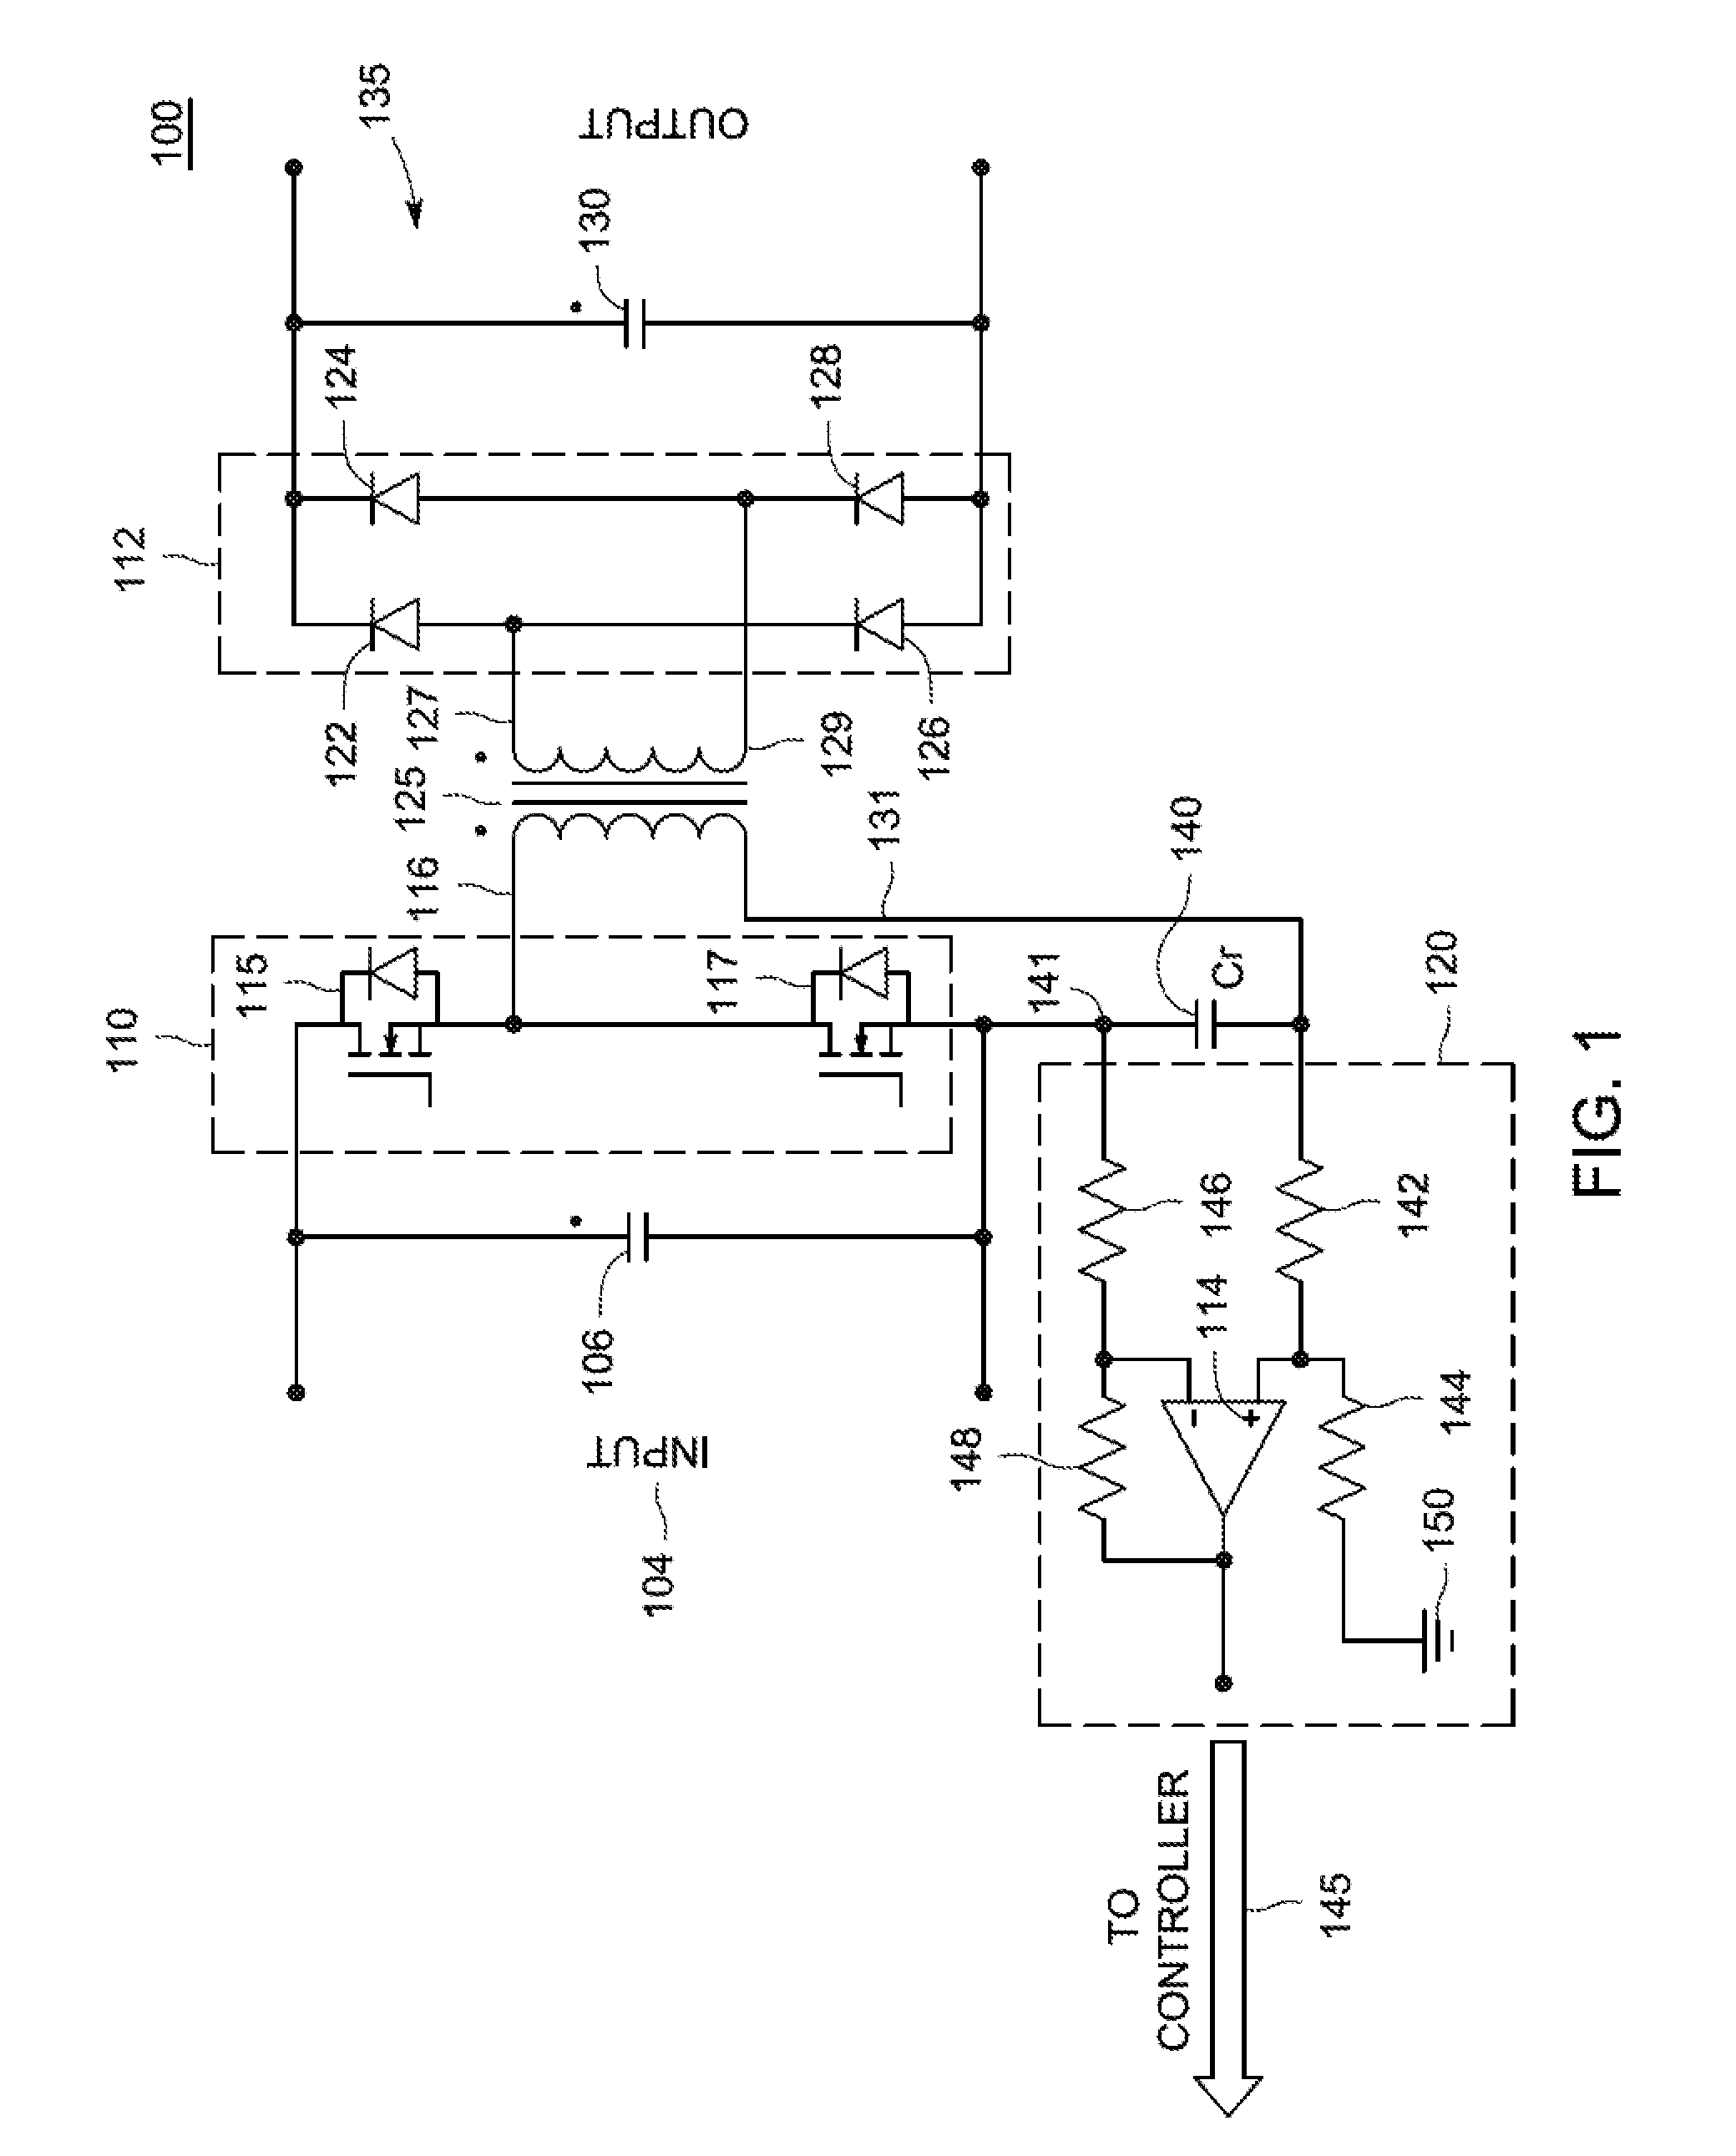 Method and apparatus for deriving current for control in a resonant power converter